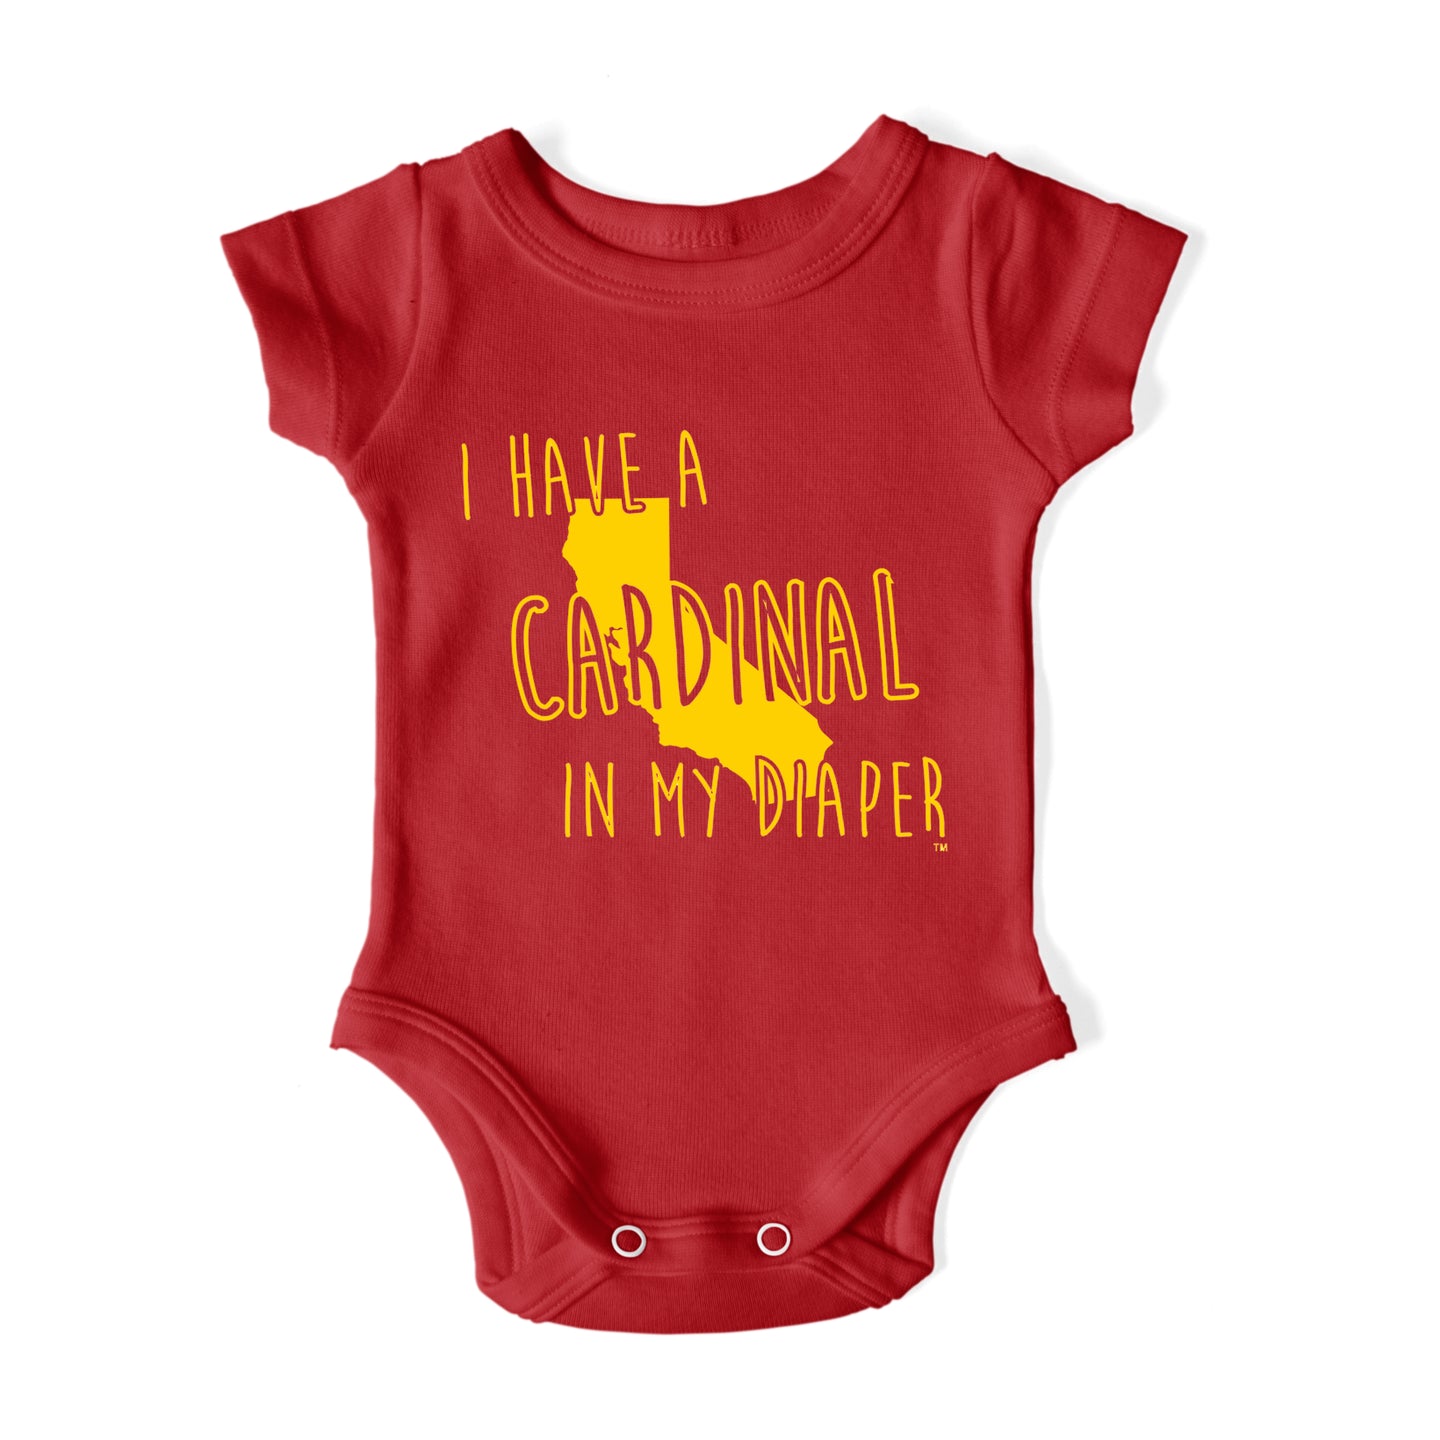 I HAVE A CARDINAL IN MY DIAPER Baby One Piece